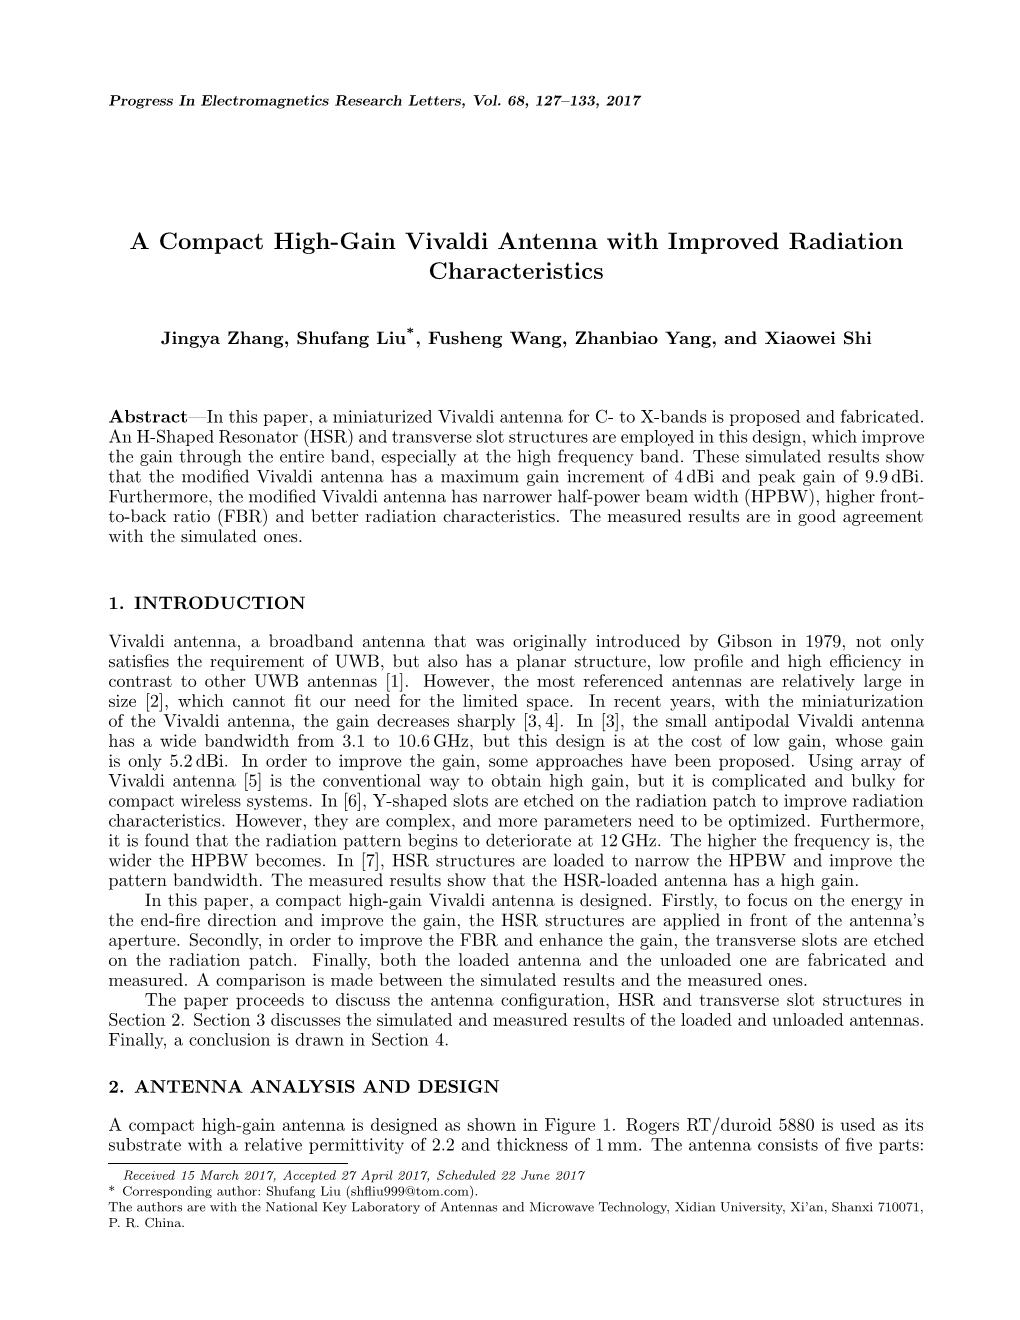 A Compact High-Gain Vivaldi Antenna with Improved Radiation Characteristics